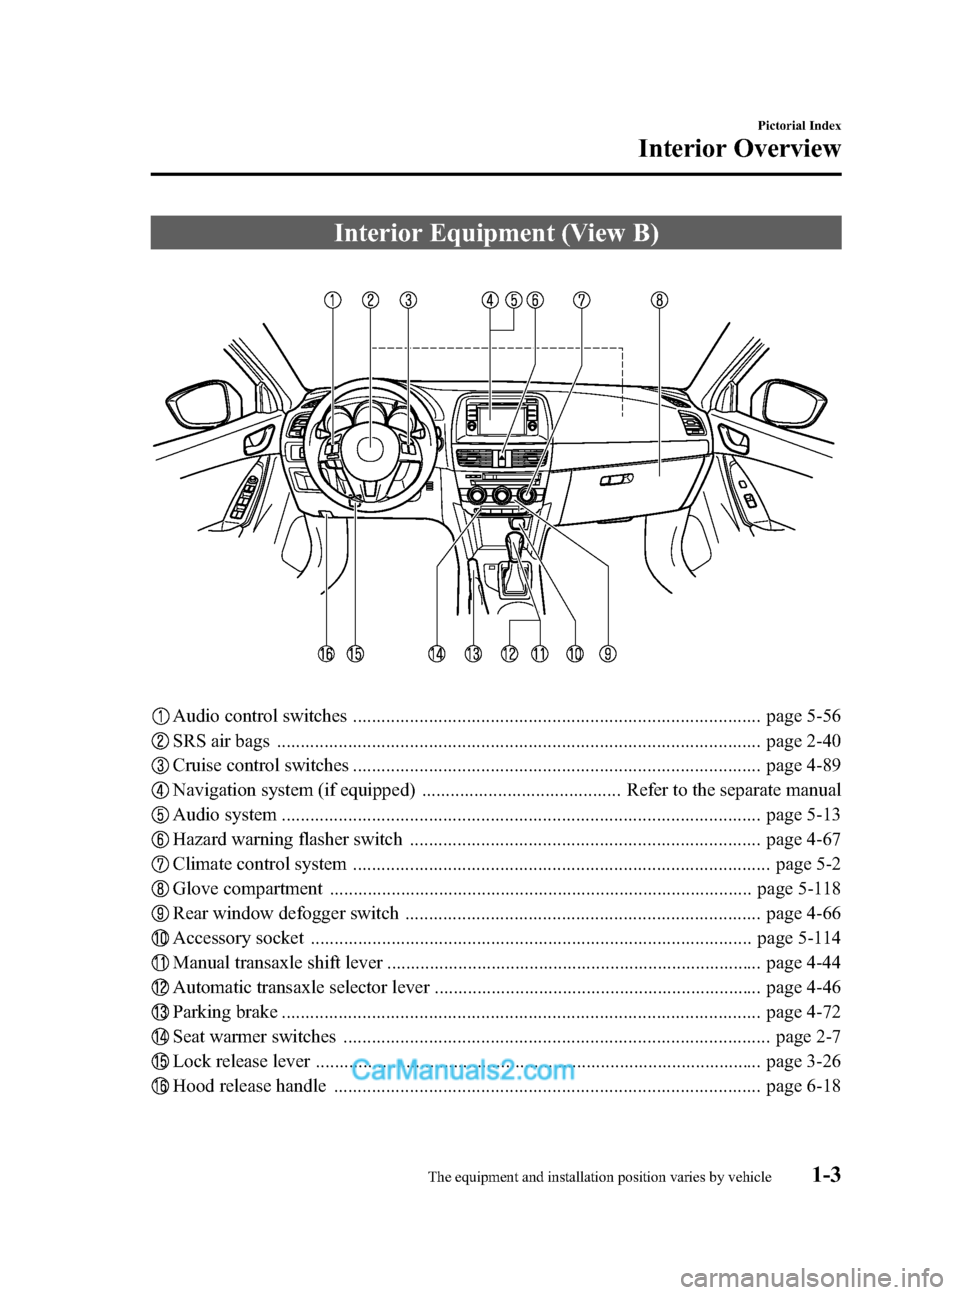 MAZDA MODEL CX-5 2015  Owners Manual (in English) Black plate (9,1)
Interior Equipment (View B)
Audio control switches ...................................................................................... page 5-56
SRS air bags .....................